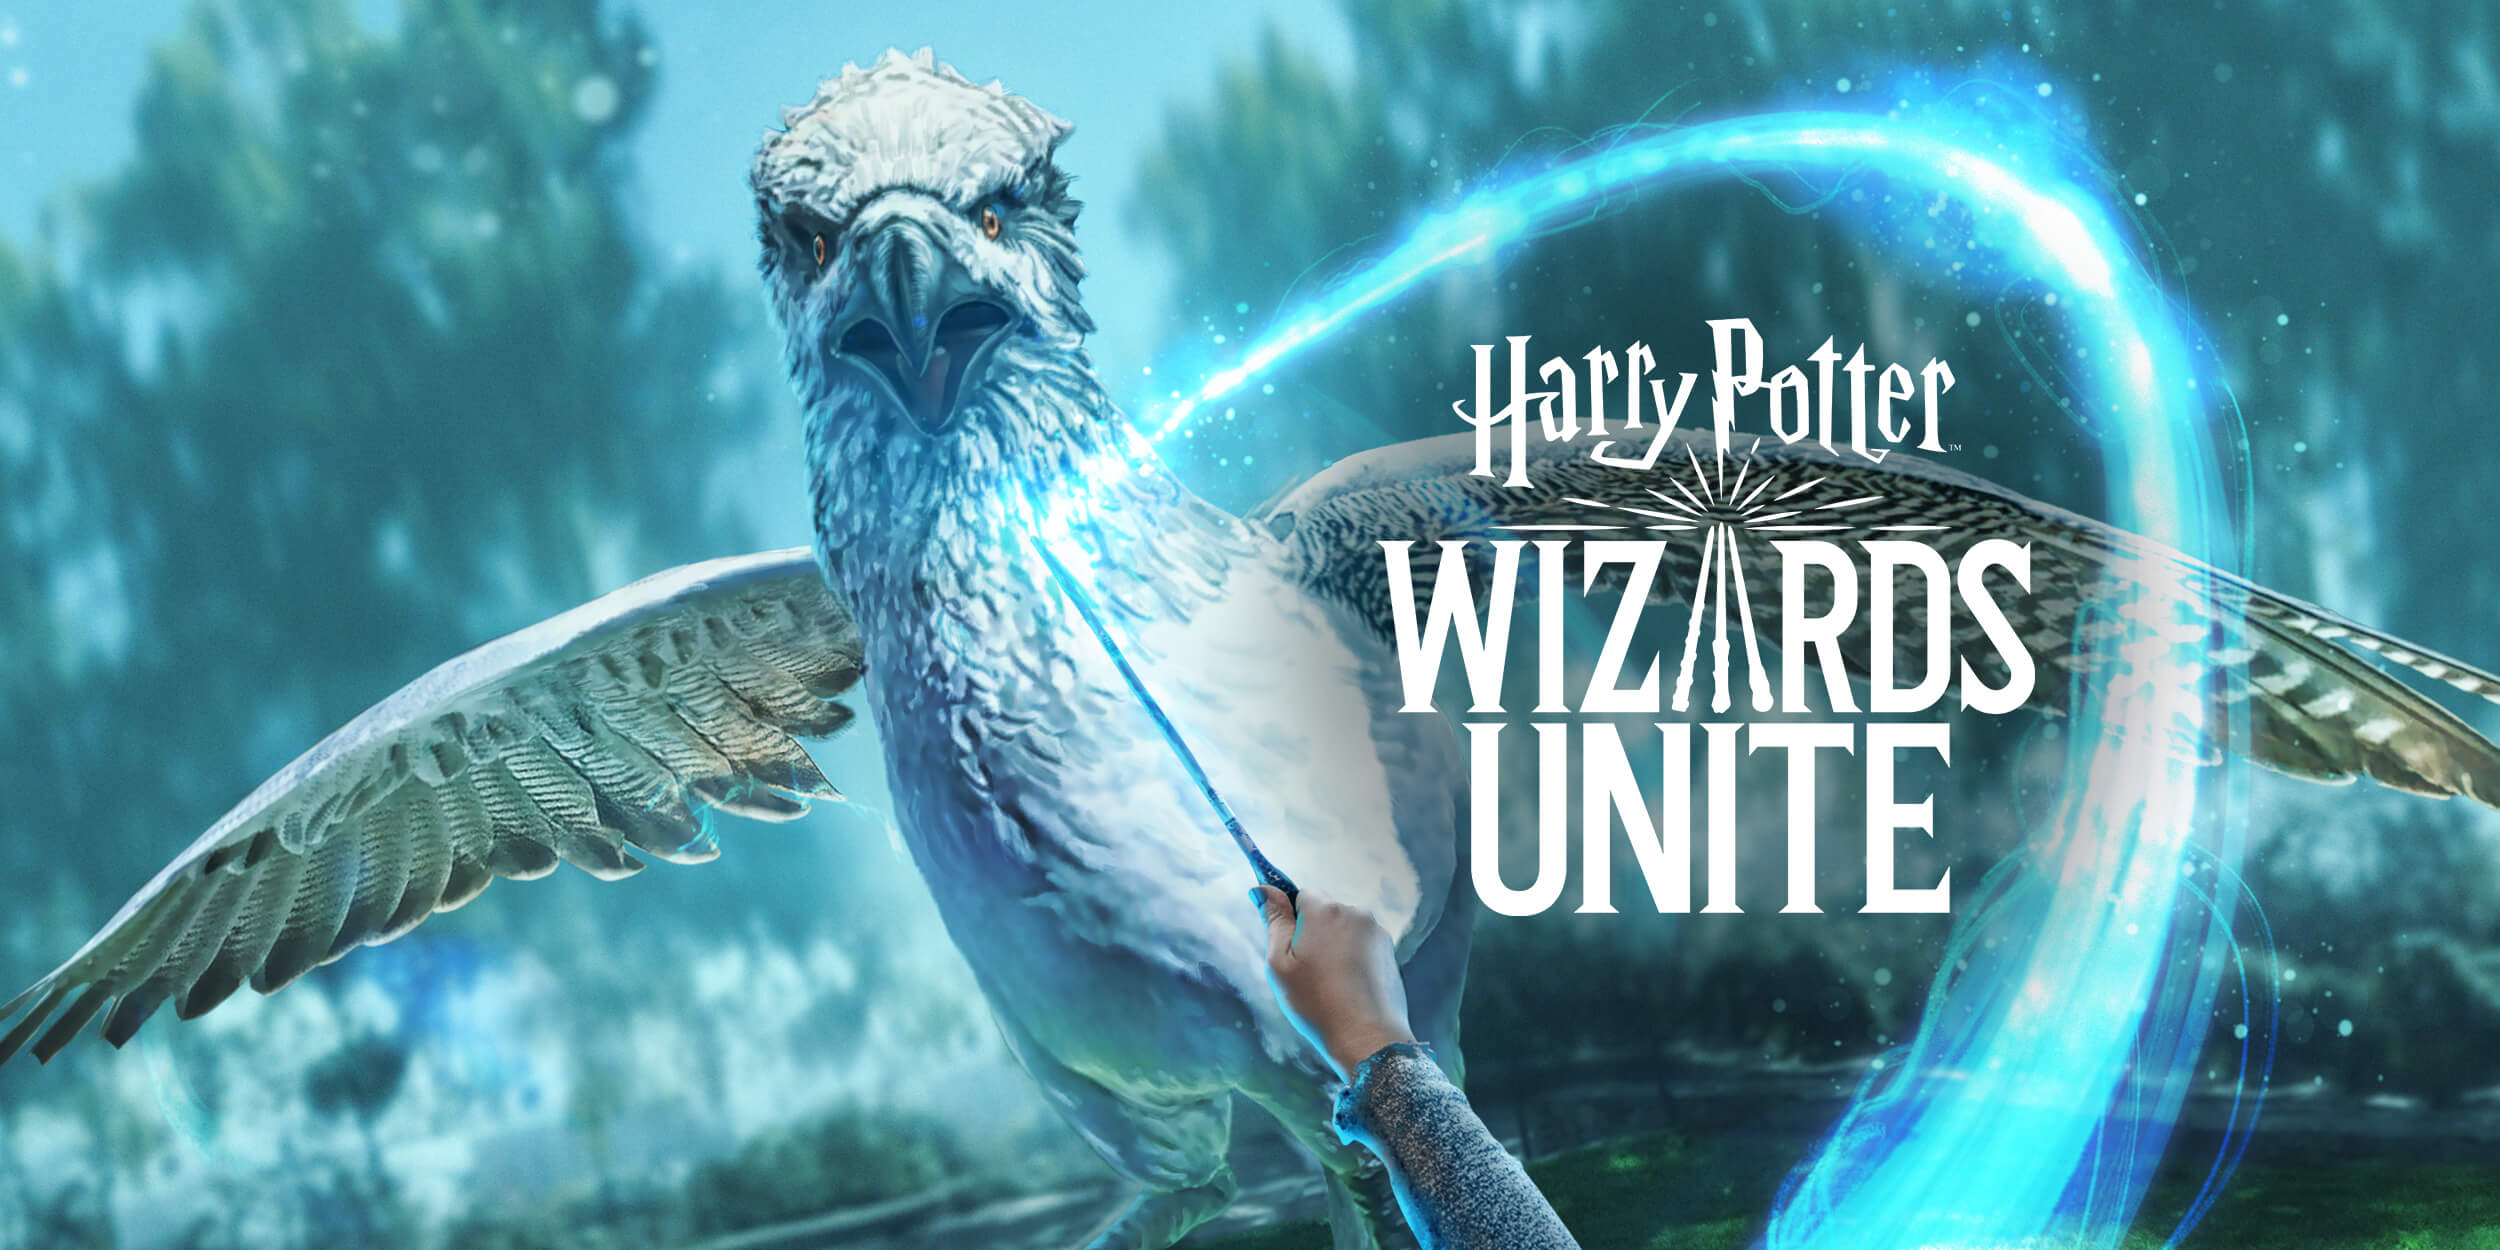 Harry Potter Wizards Unite Is Getting Dragons During Their First Fan Fest, Then Dragons Will Be Released To The World